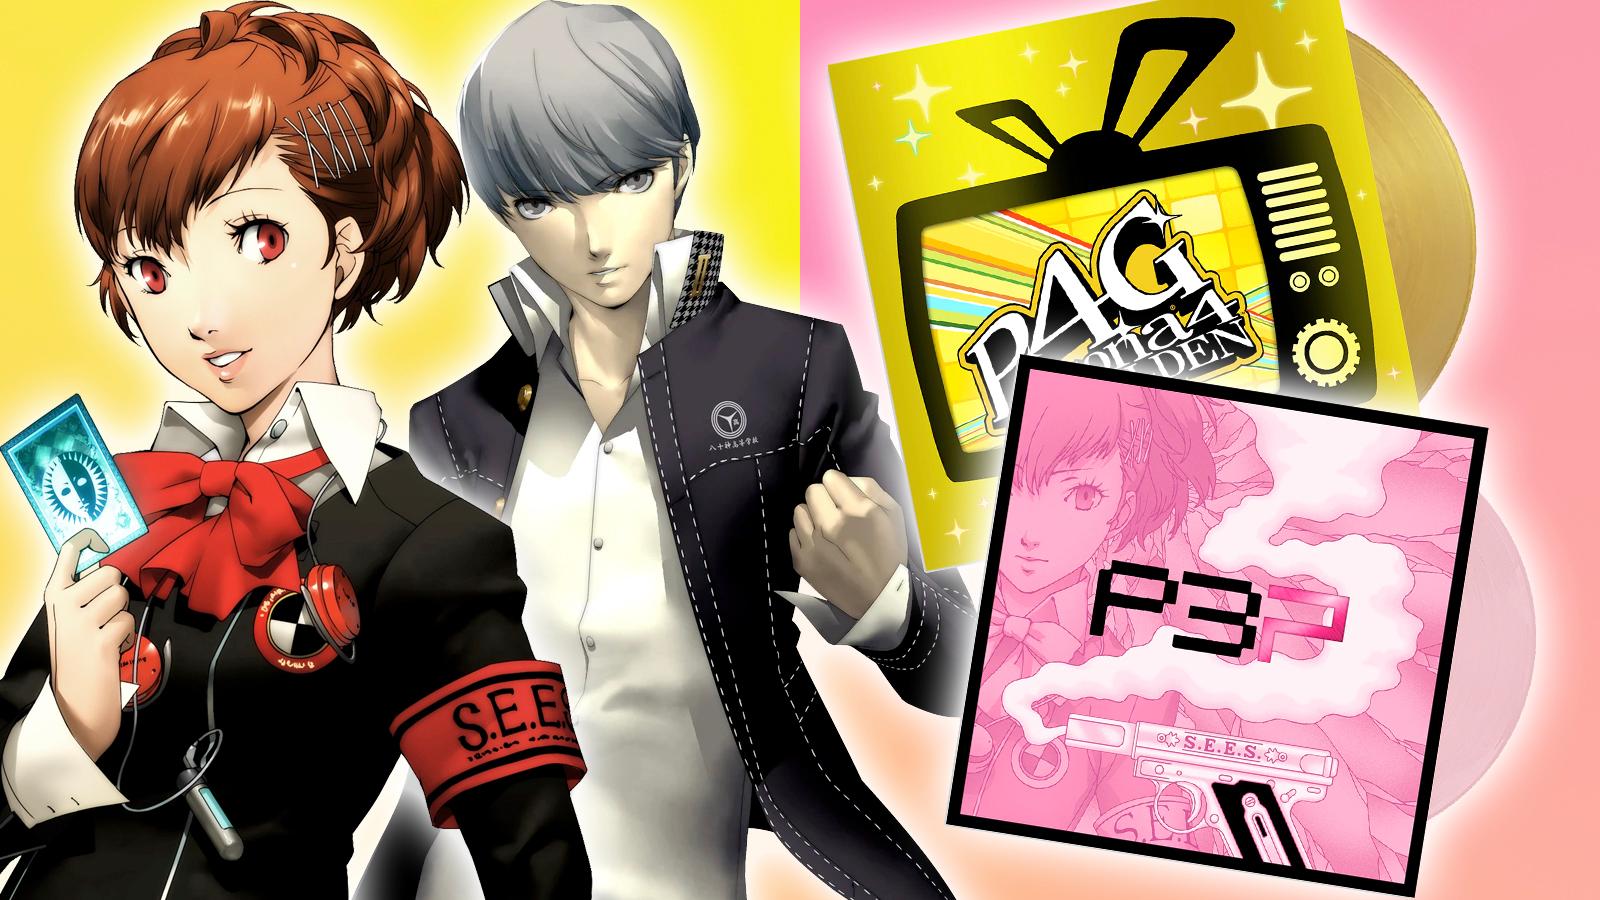 You can Stream Persona 3 & 4, but make sure to spoiler tag the decade old  games